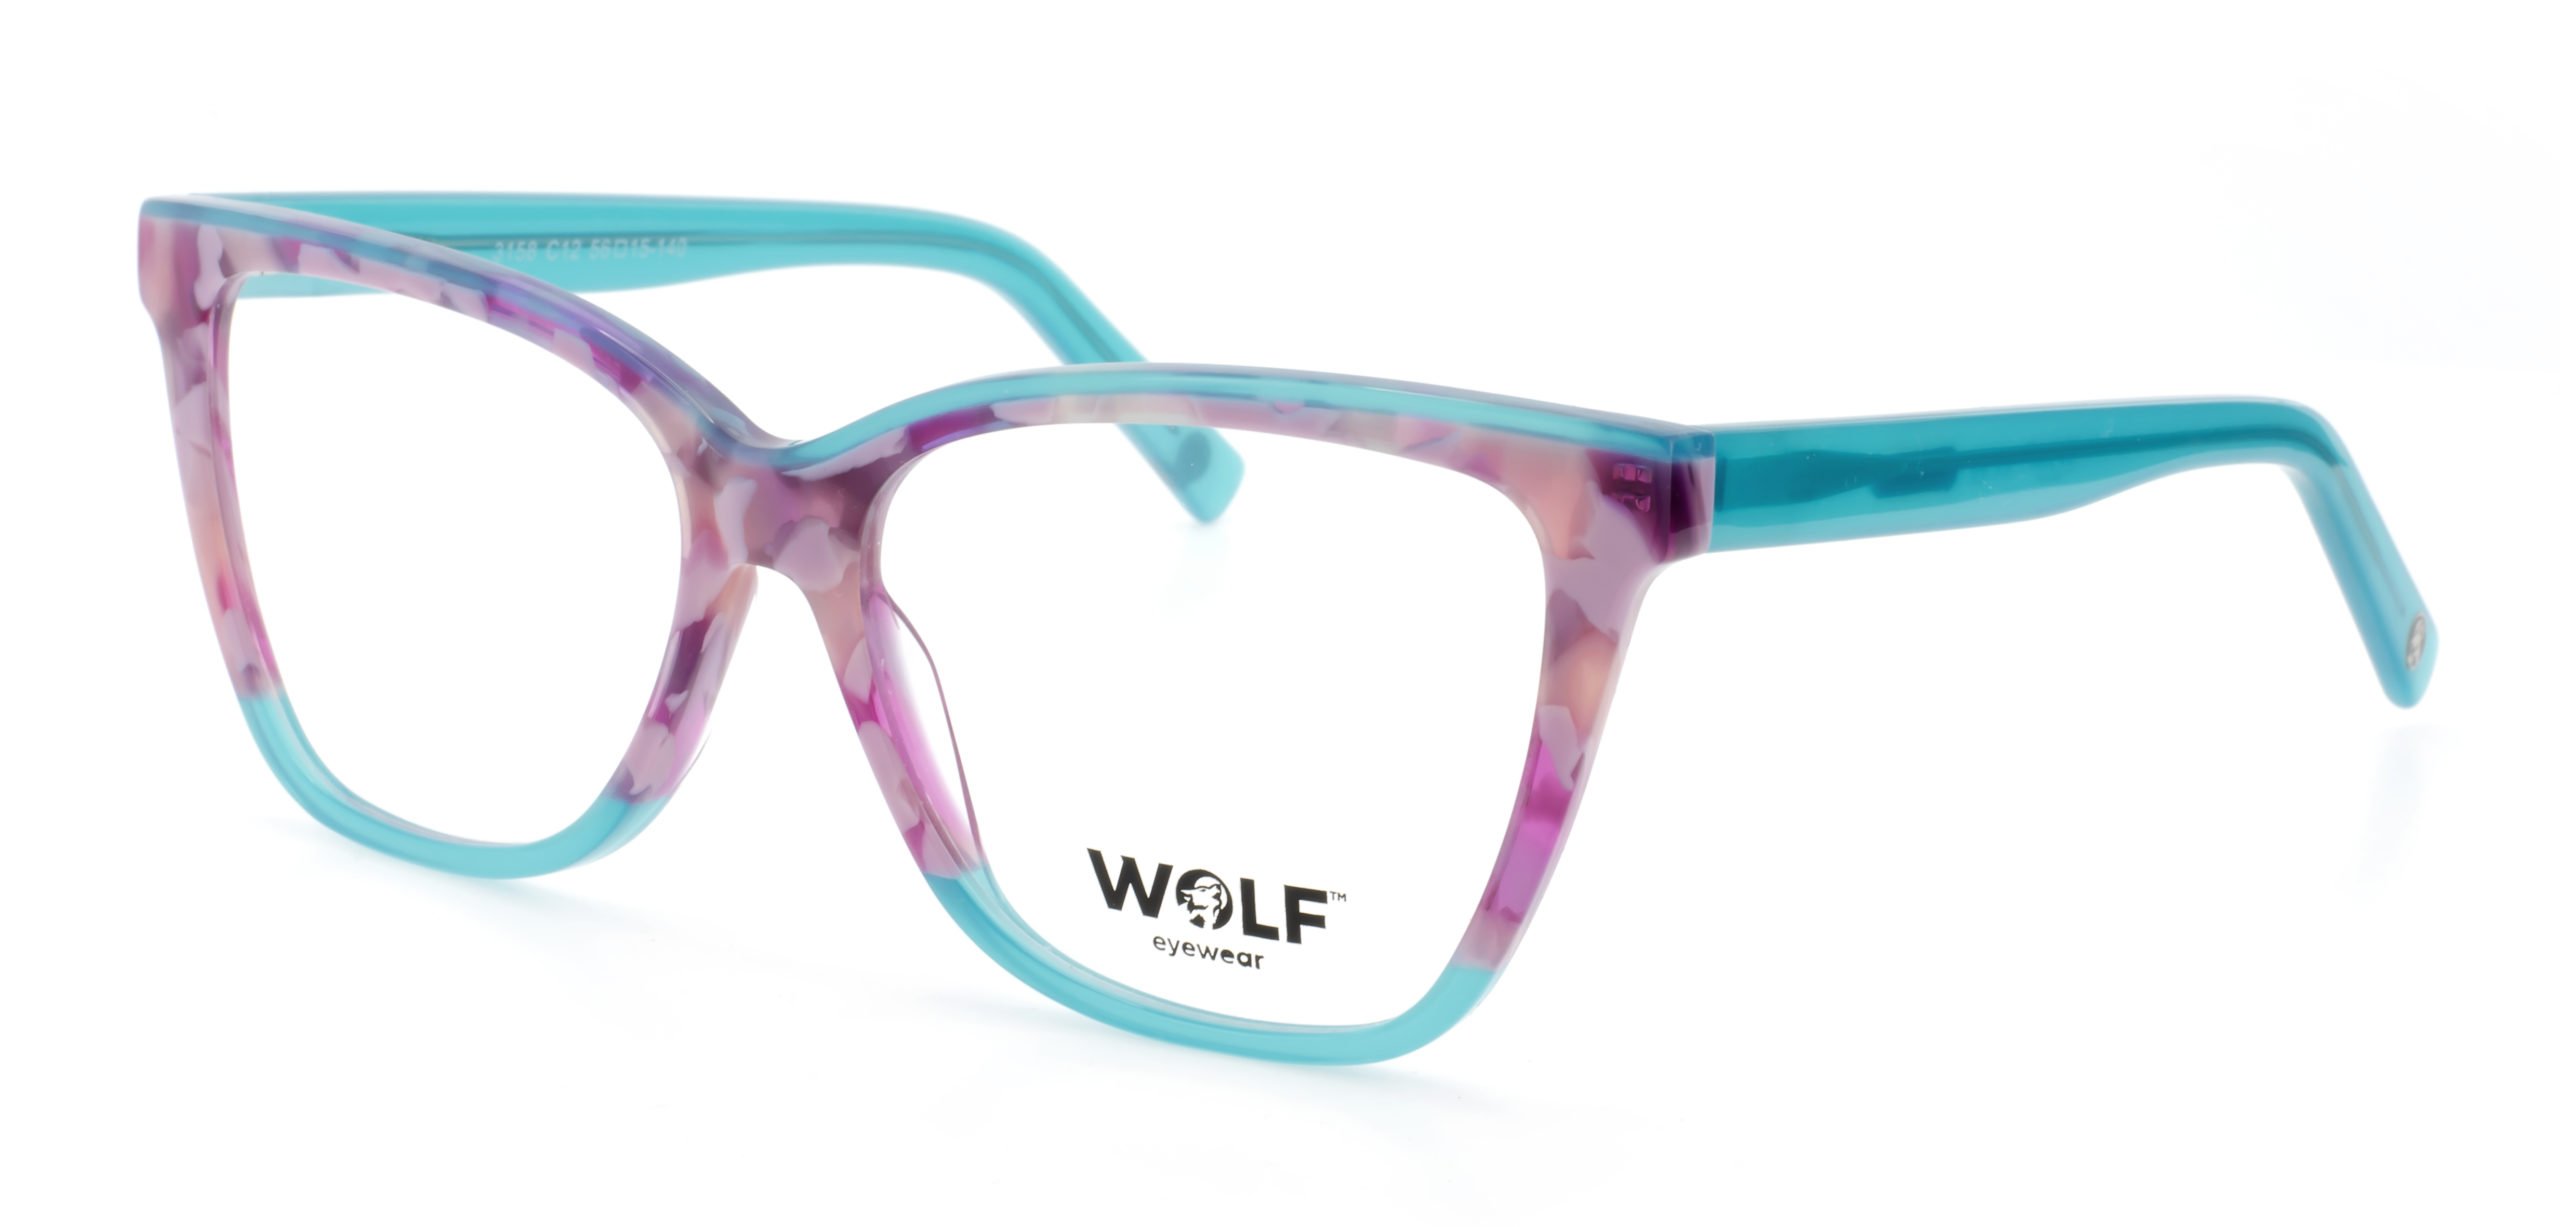 wolf_3158_pinkmottleturquoise